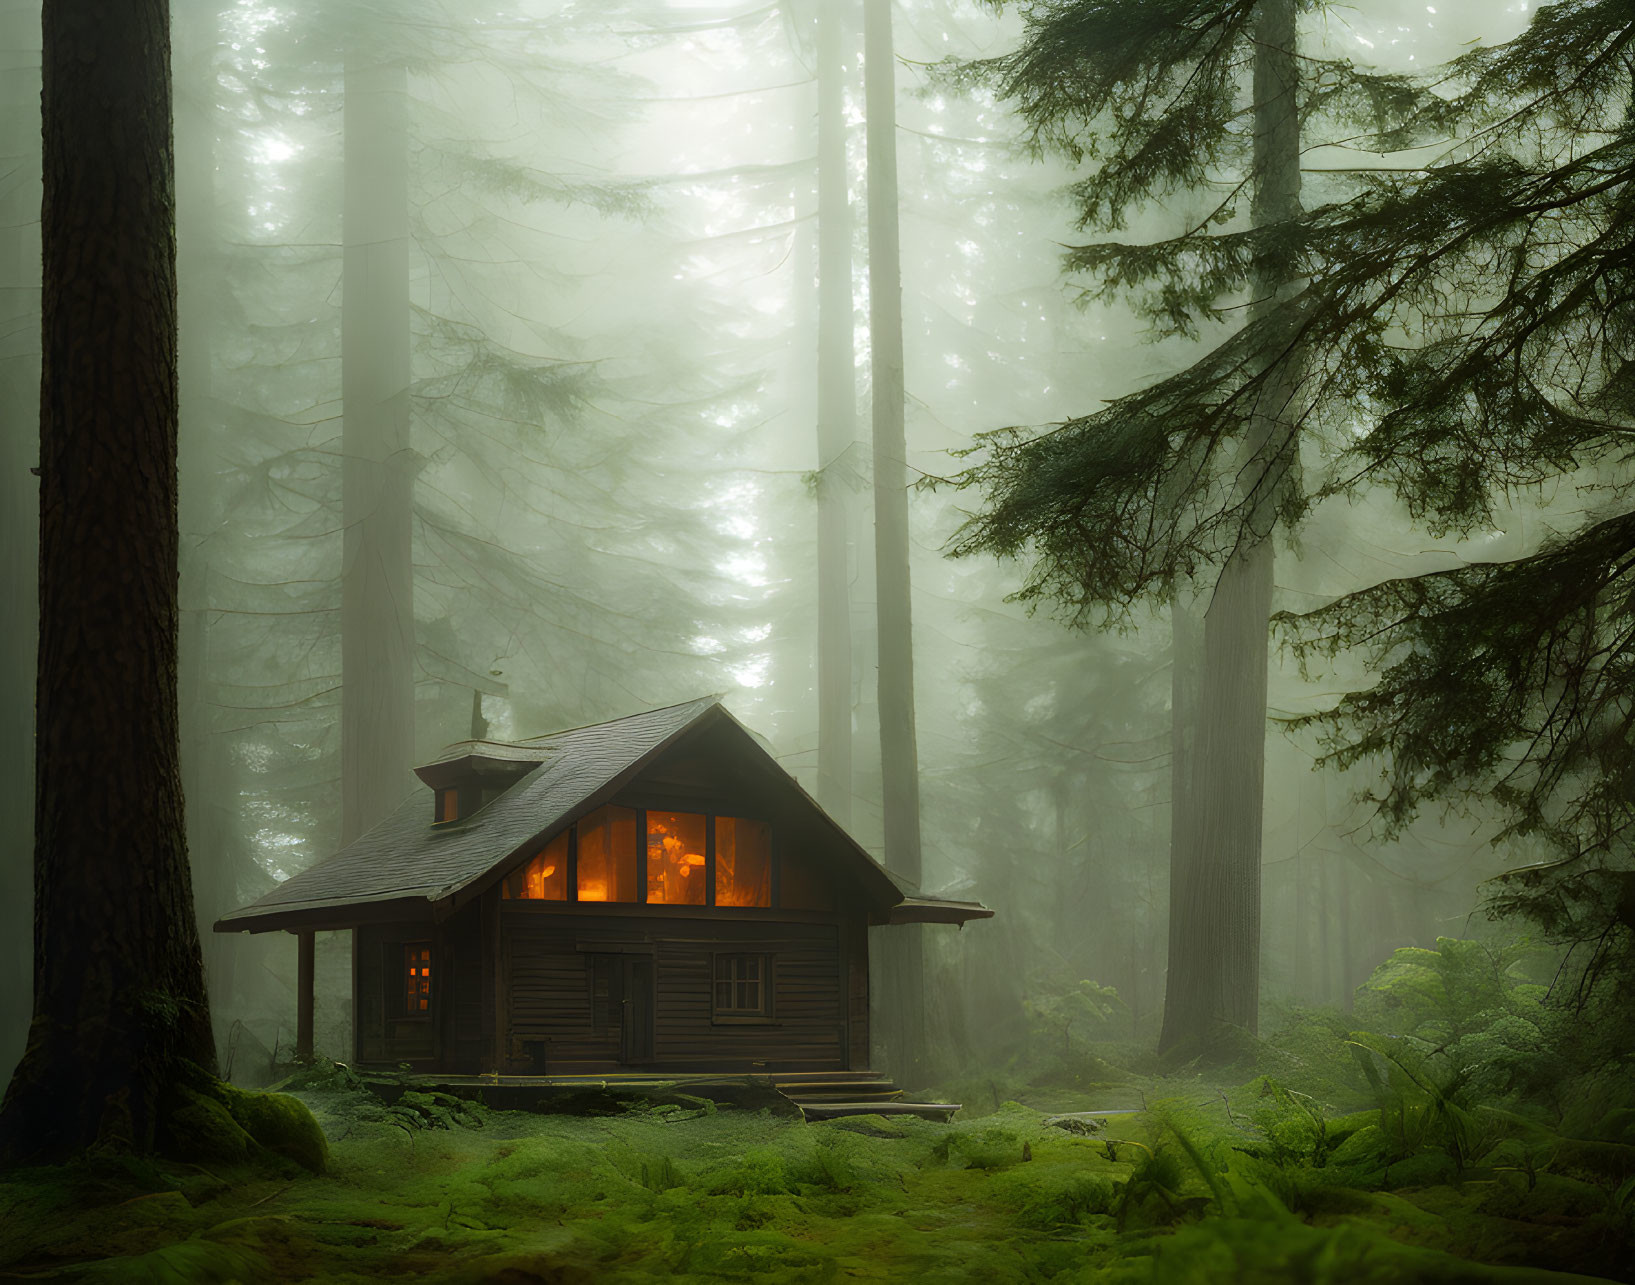 Rustic wooden cabin in foggy forest with glowing windows